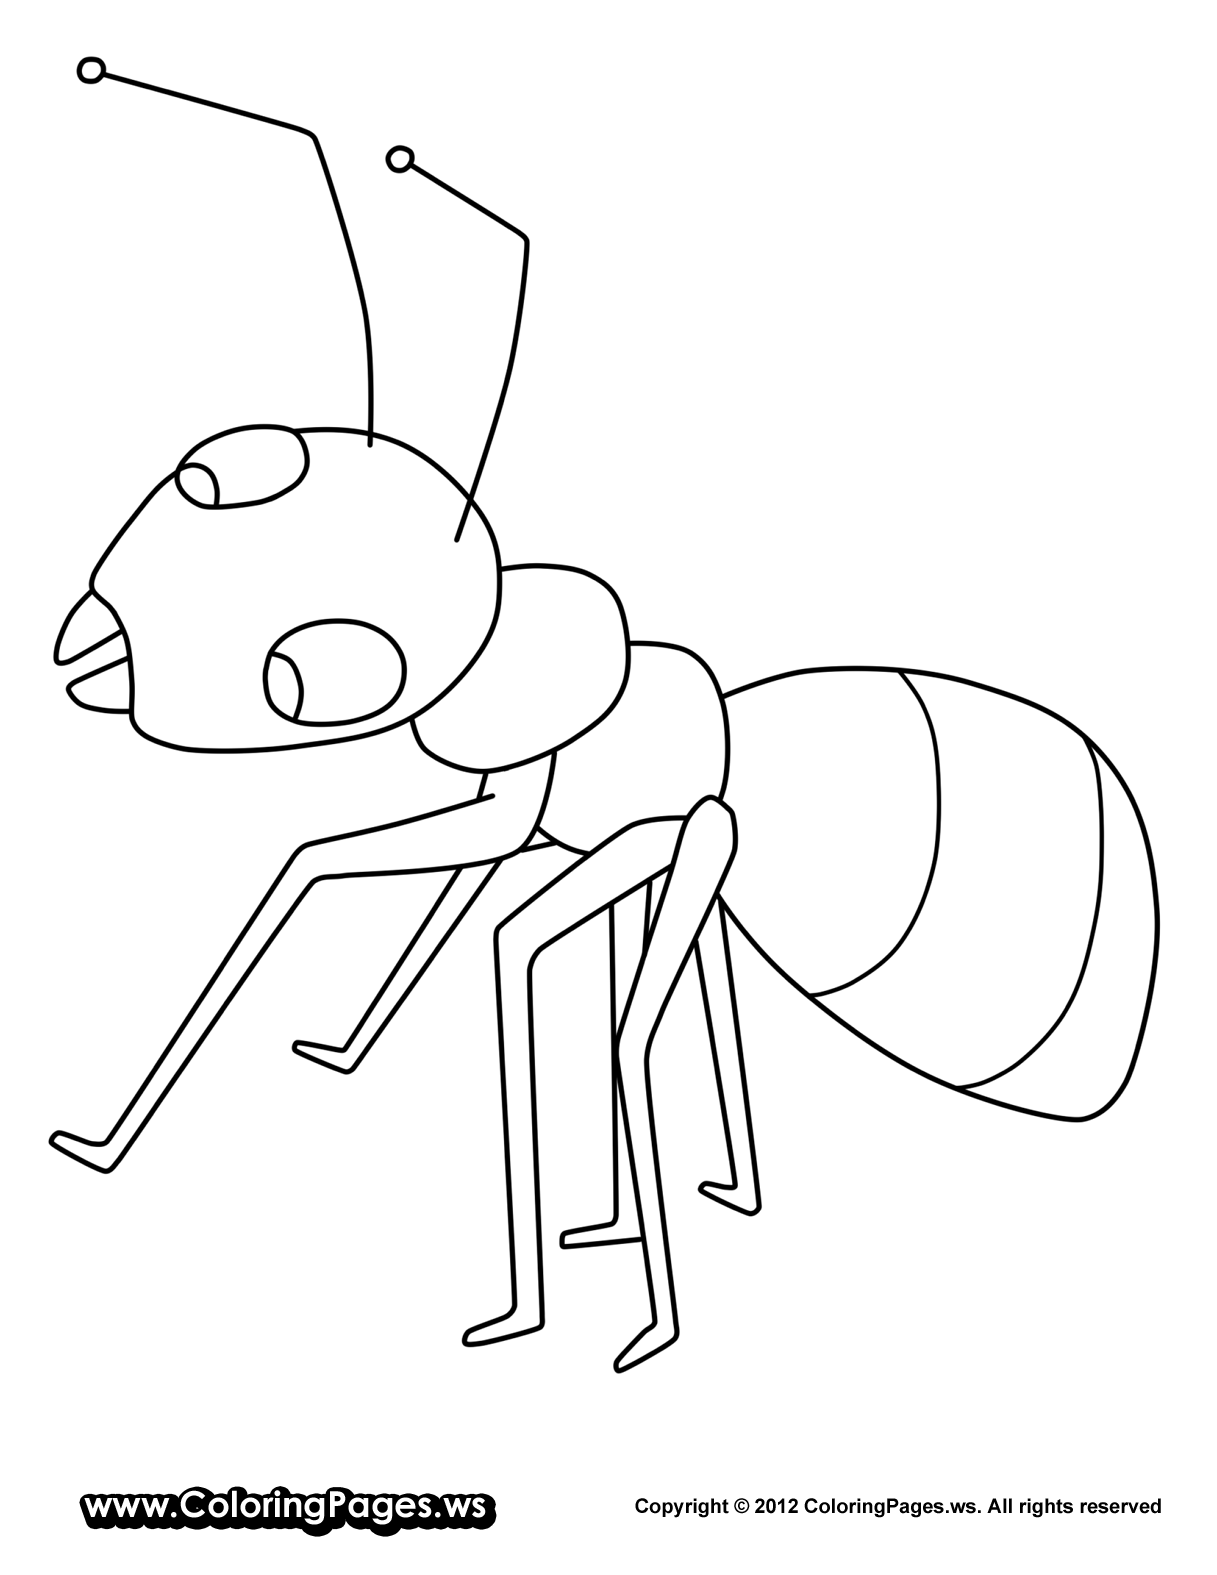 Ant coloring pages to download and print for free